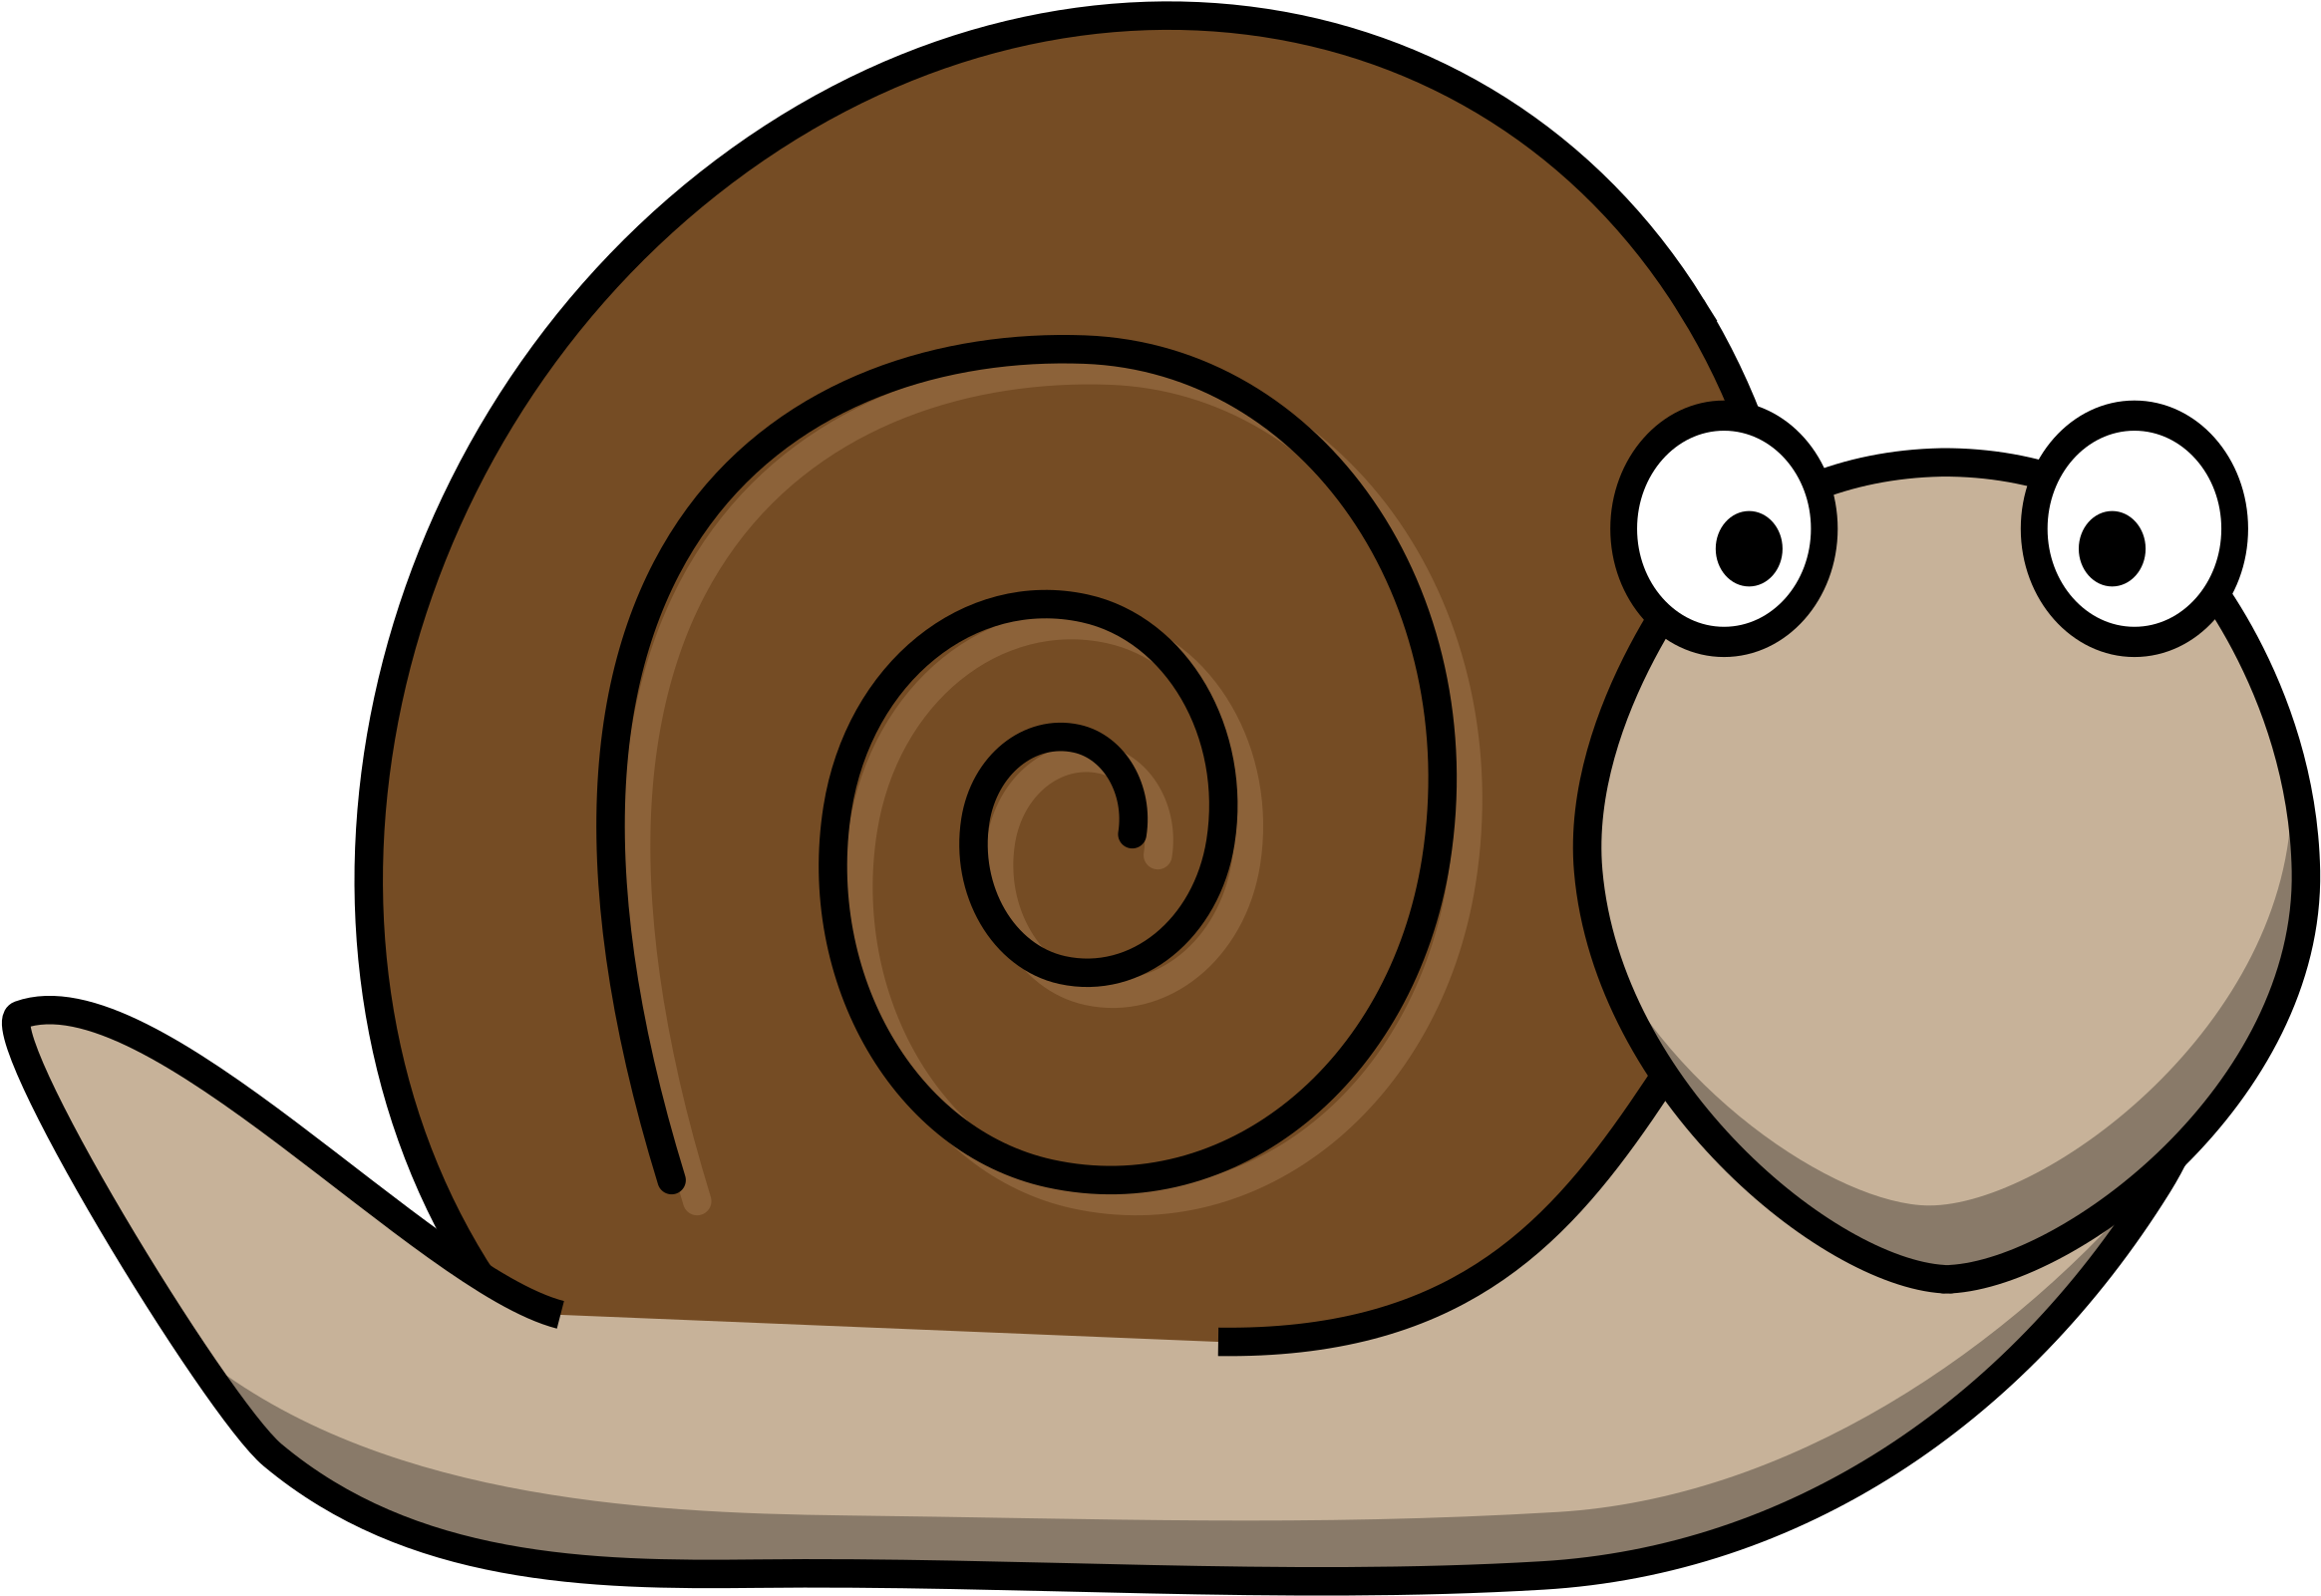 Discover Ideas About Woodland Creatures - Cartoon Snail (2400x1680)